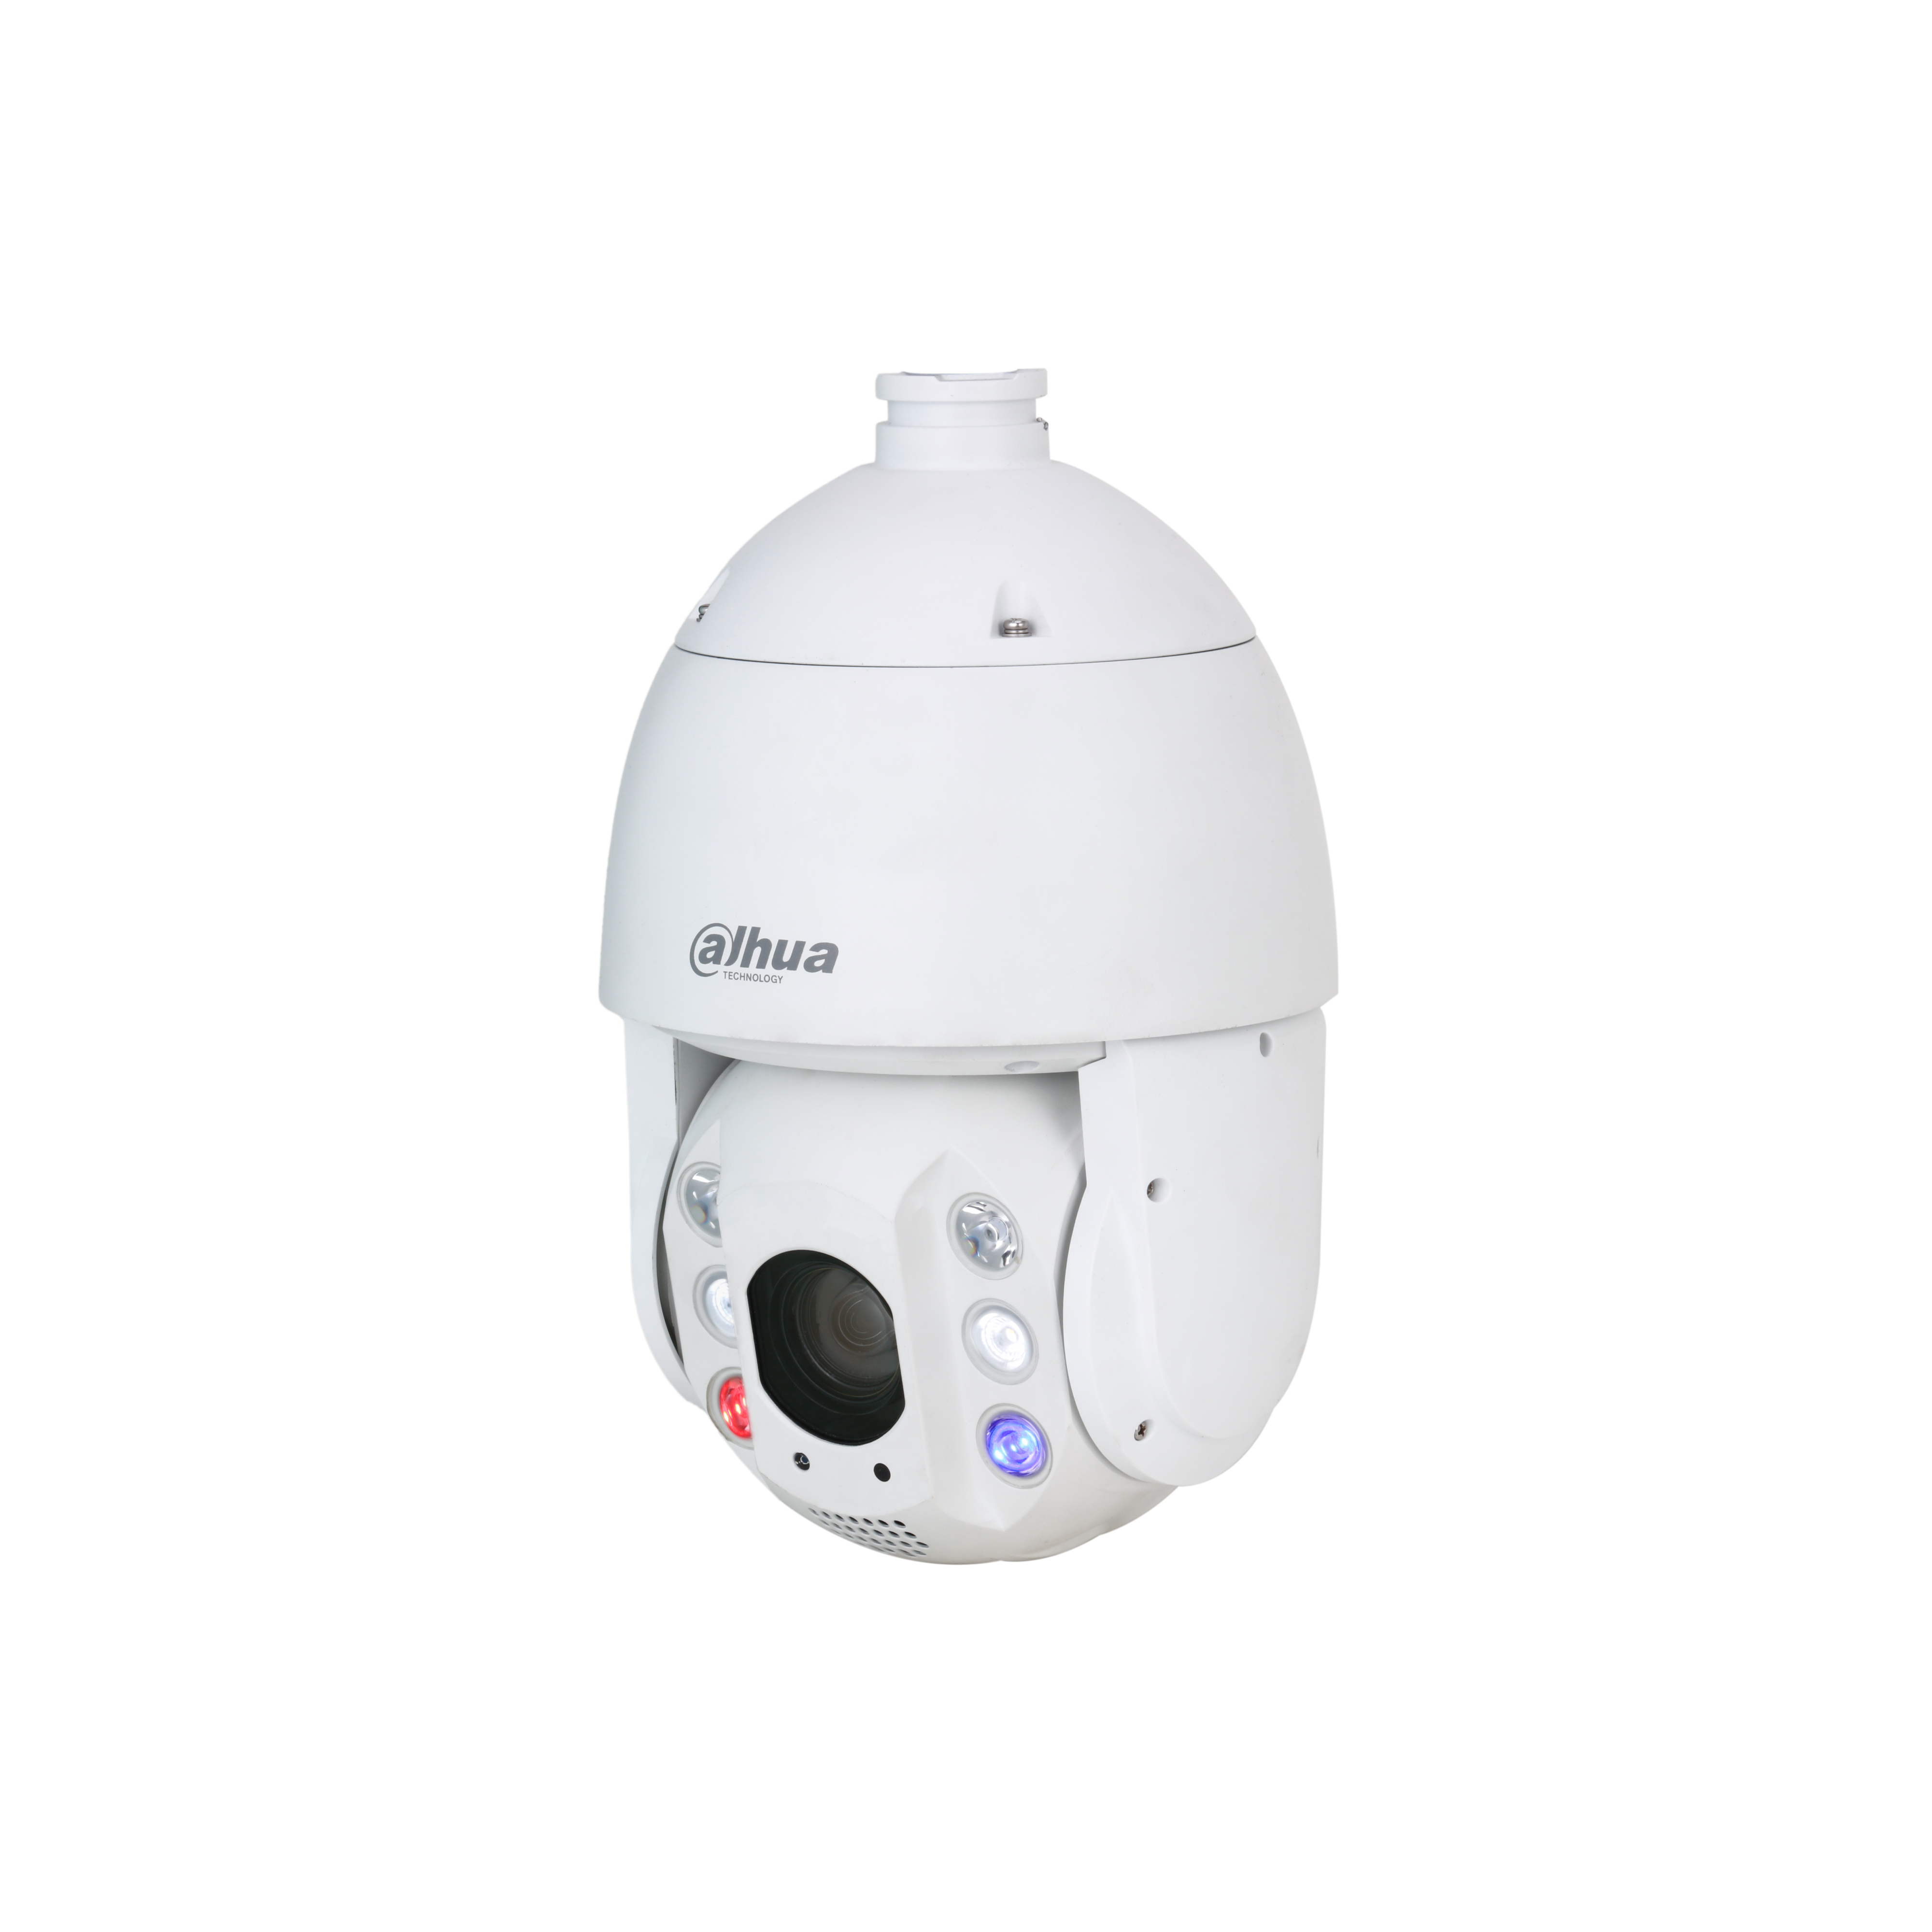 WIZSENSE SERIES IP CAMERA WHITE AI TIOC AUTO TRACKING 4MP H.264/4+/5/5+ SPEED DOME PTZ 120 WDR METAL 5-125MMMOTORISED LENS 25X ZOOM STARLIGHT IR+WHITE LED 150M POE+ IP66 WITHOUT MIC AUDIO IN AUDIO OUT 2 x ALARM IN 1 x ALARM OUT SUPPORT UP TO 512GB SD 24VDC